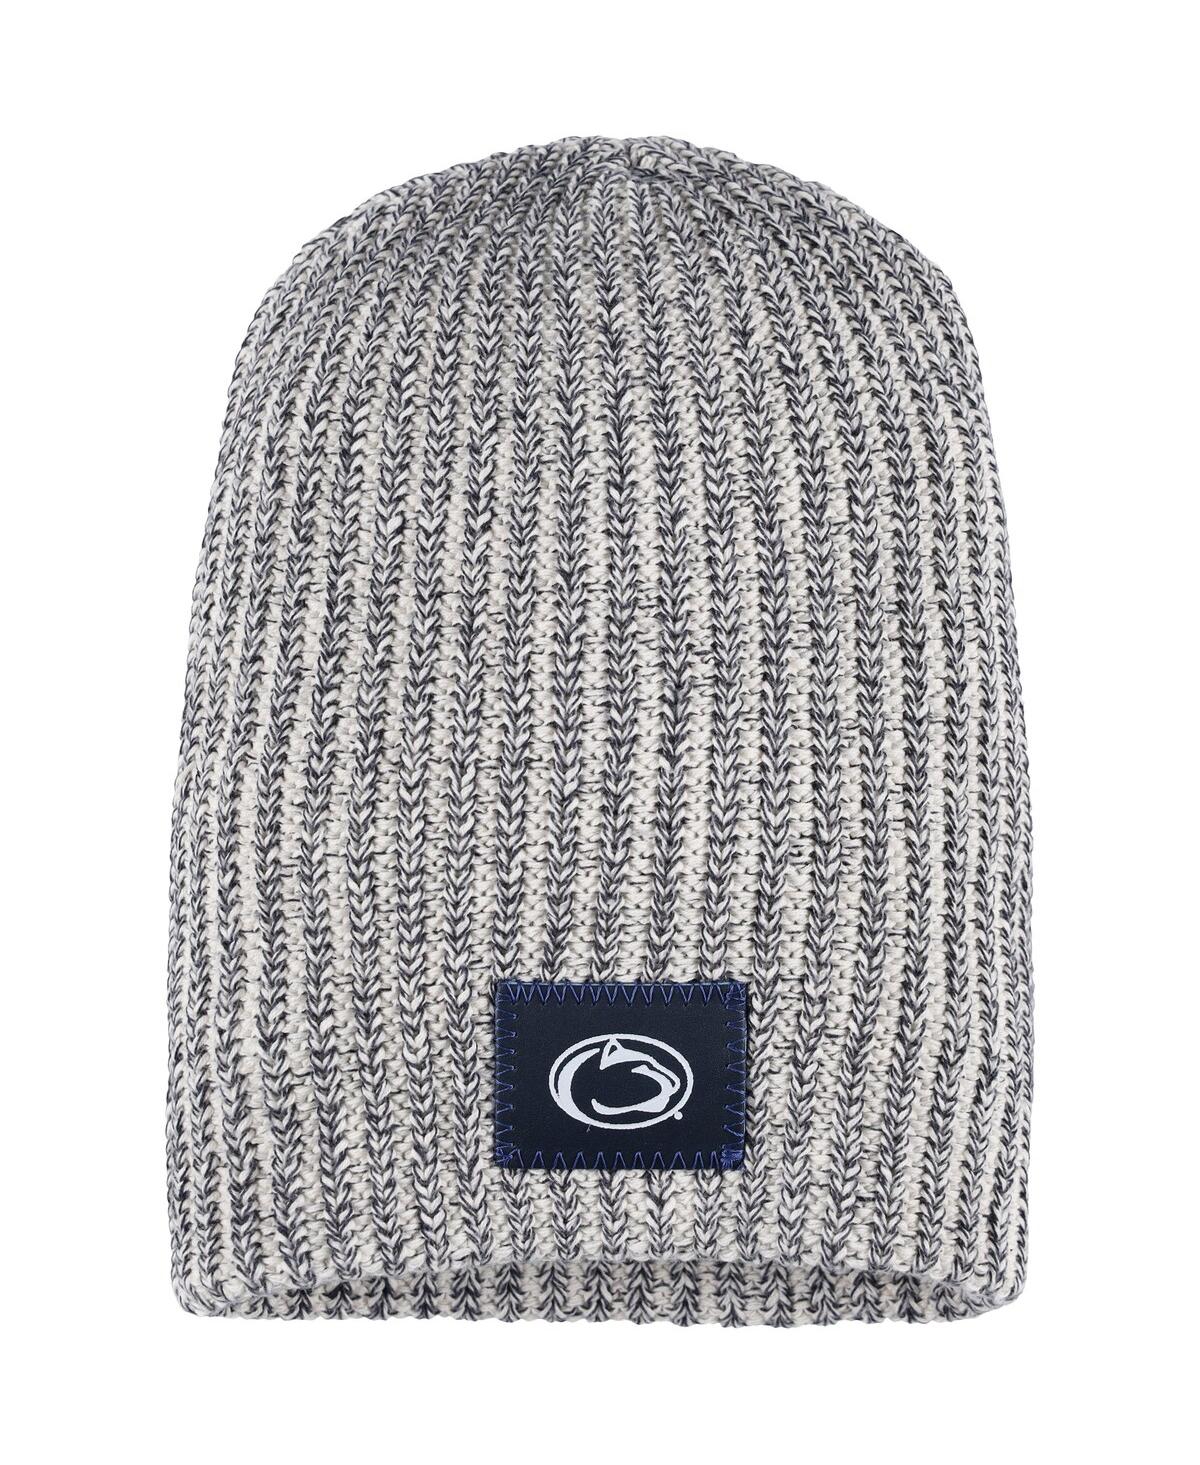 Women's Love Your Melon Gray Penn State Nittany Lions Beanie - Gray